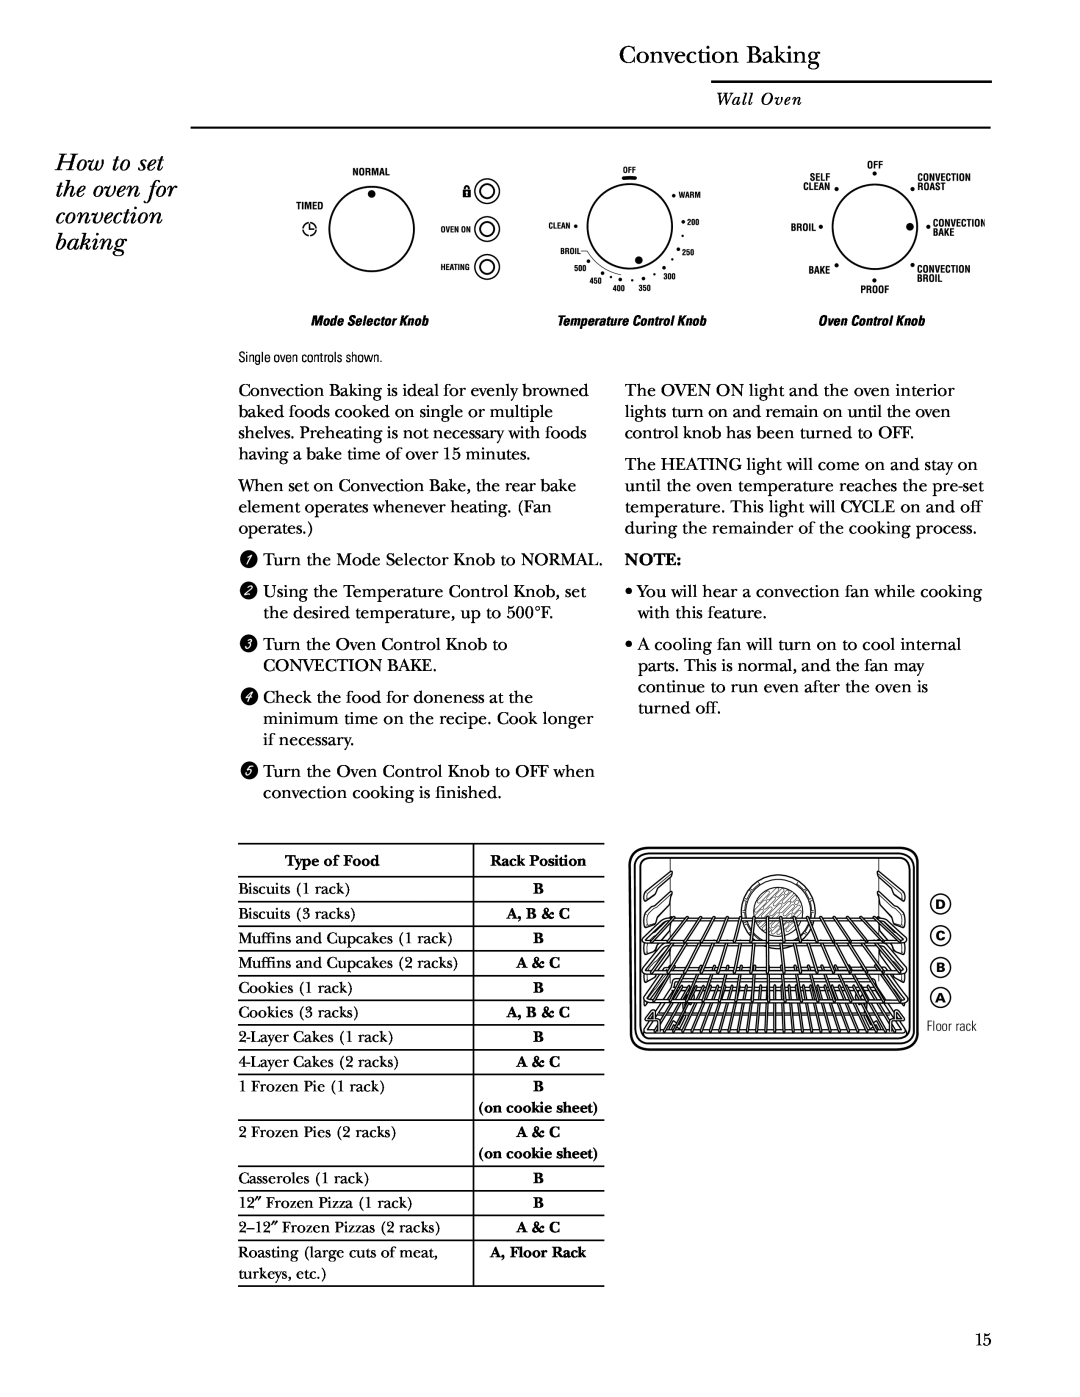 GE Monogram ZET1038, ZET1058 owner manual Convection Baking, How to set the oven for convection baking 